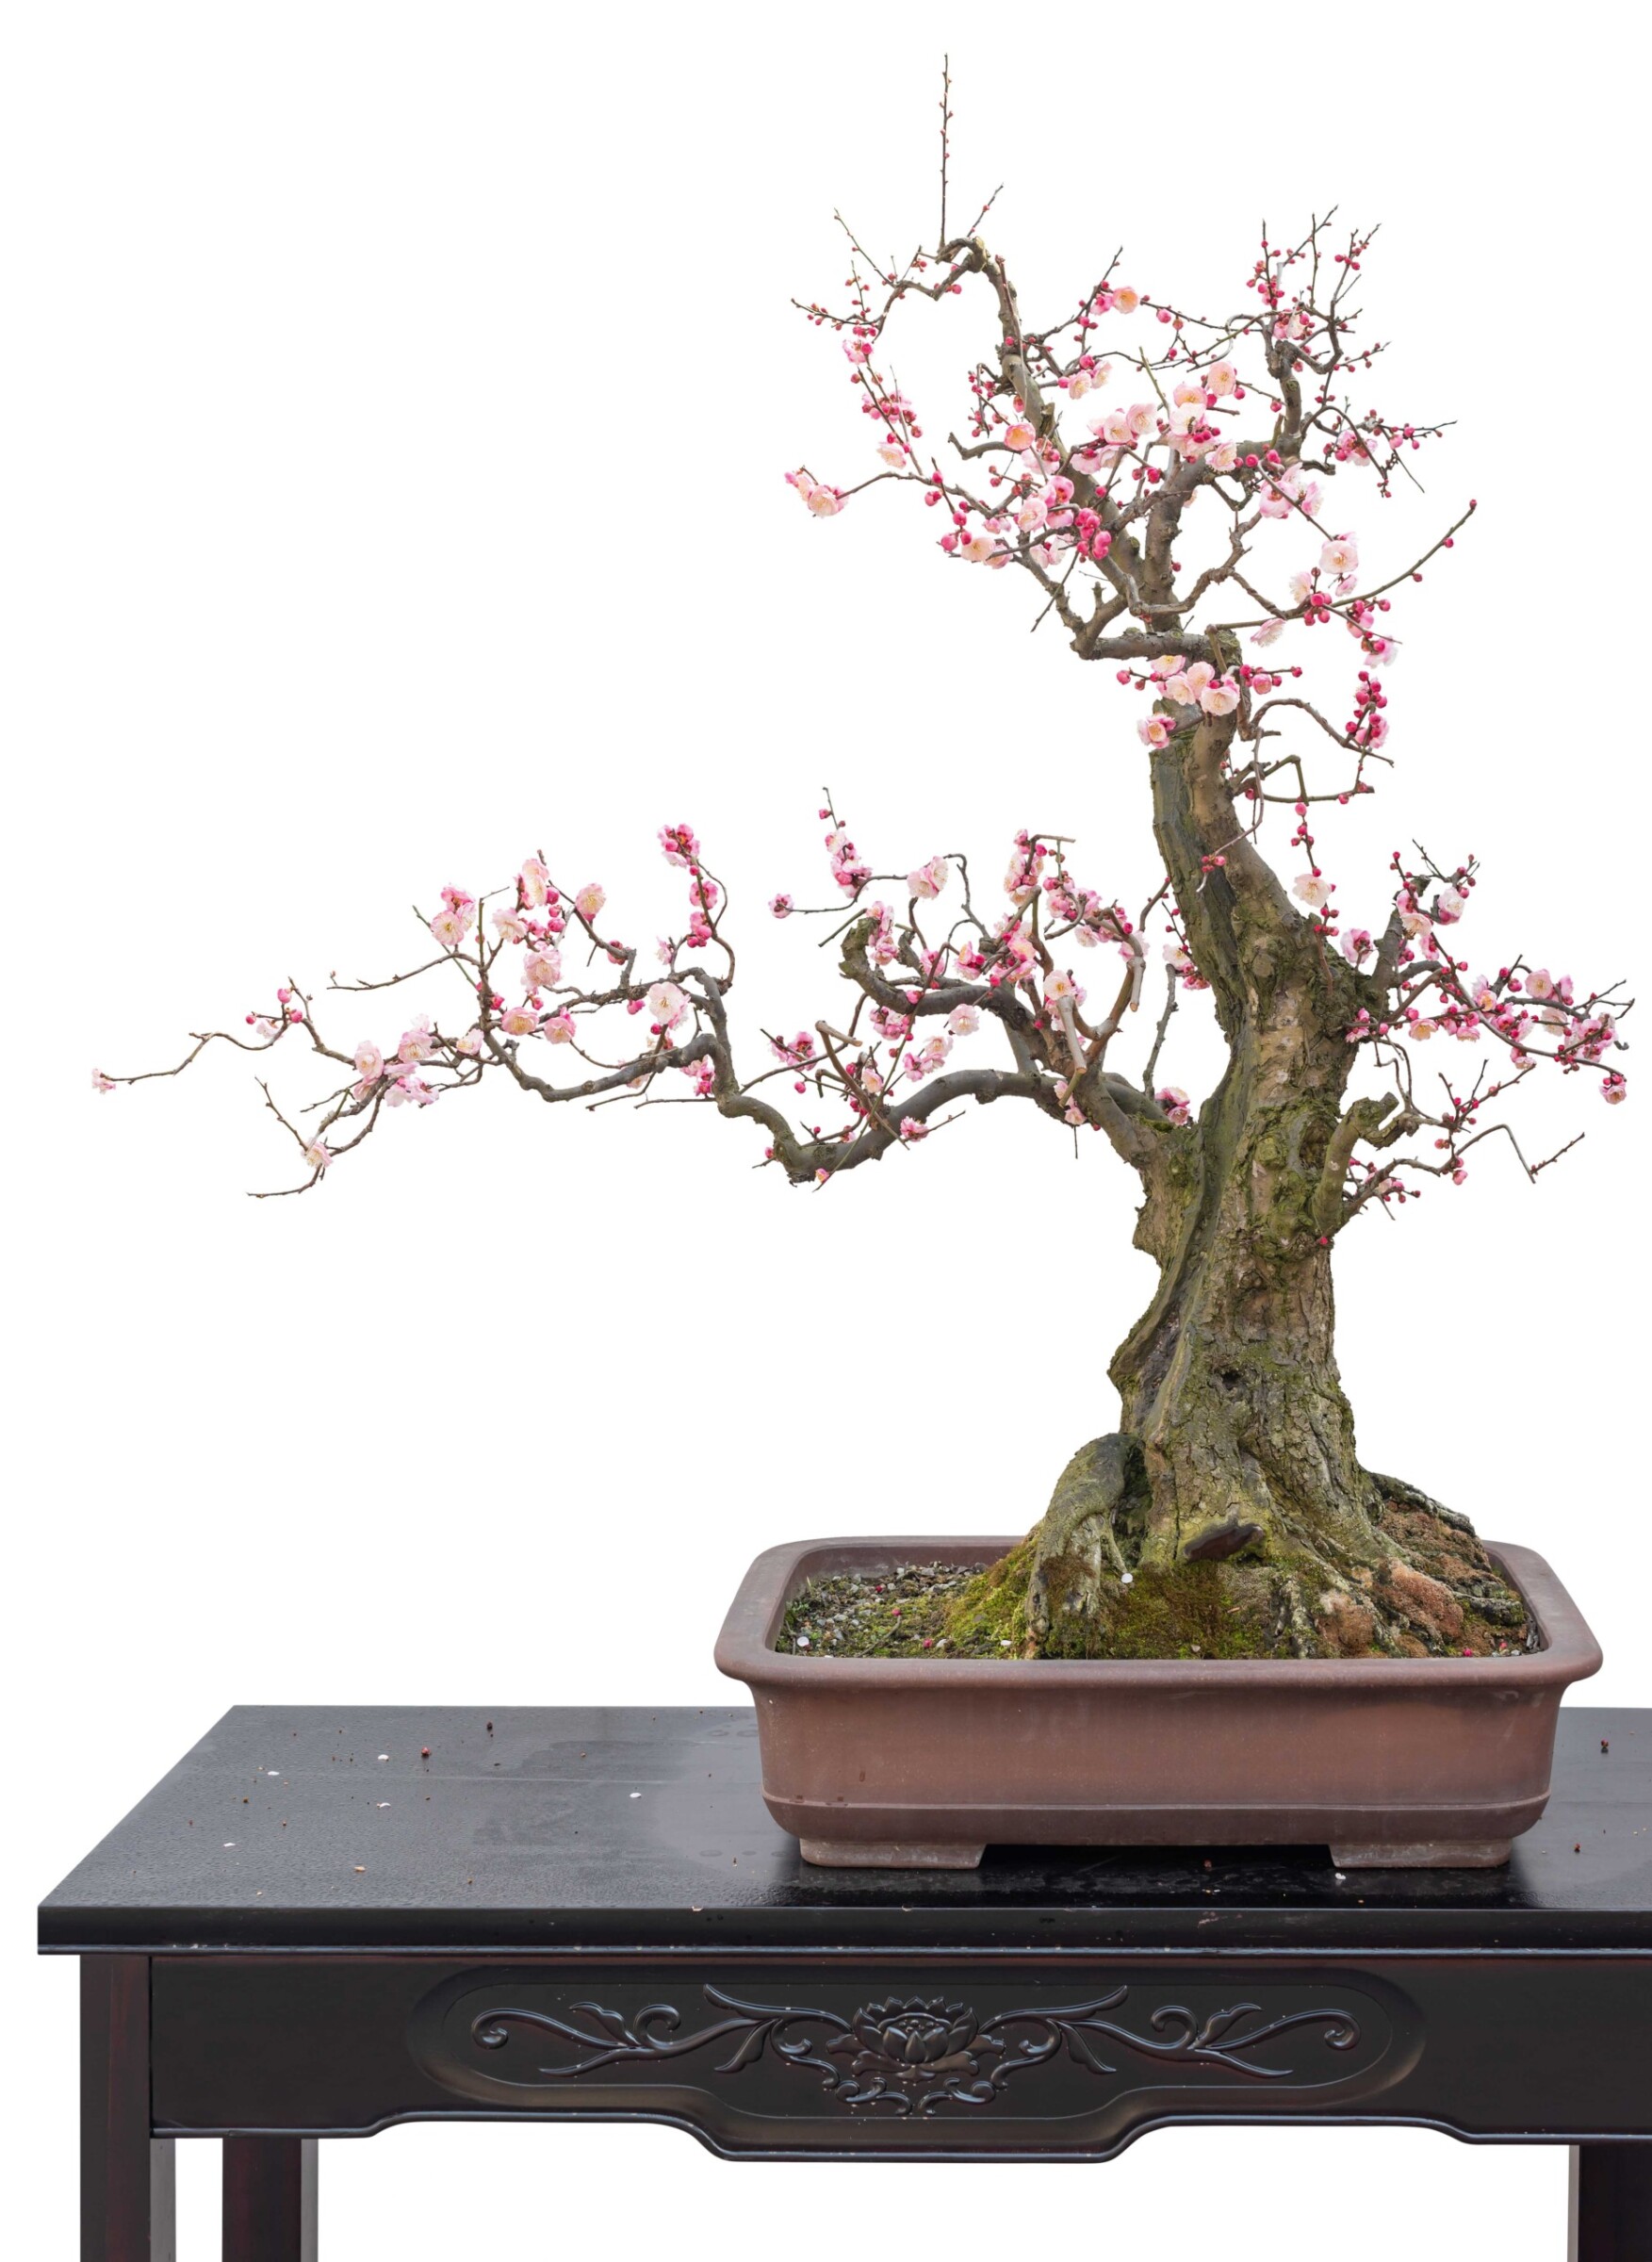 Traditional bonsai plant cultivation is similarly based on the principle of imperfection.